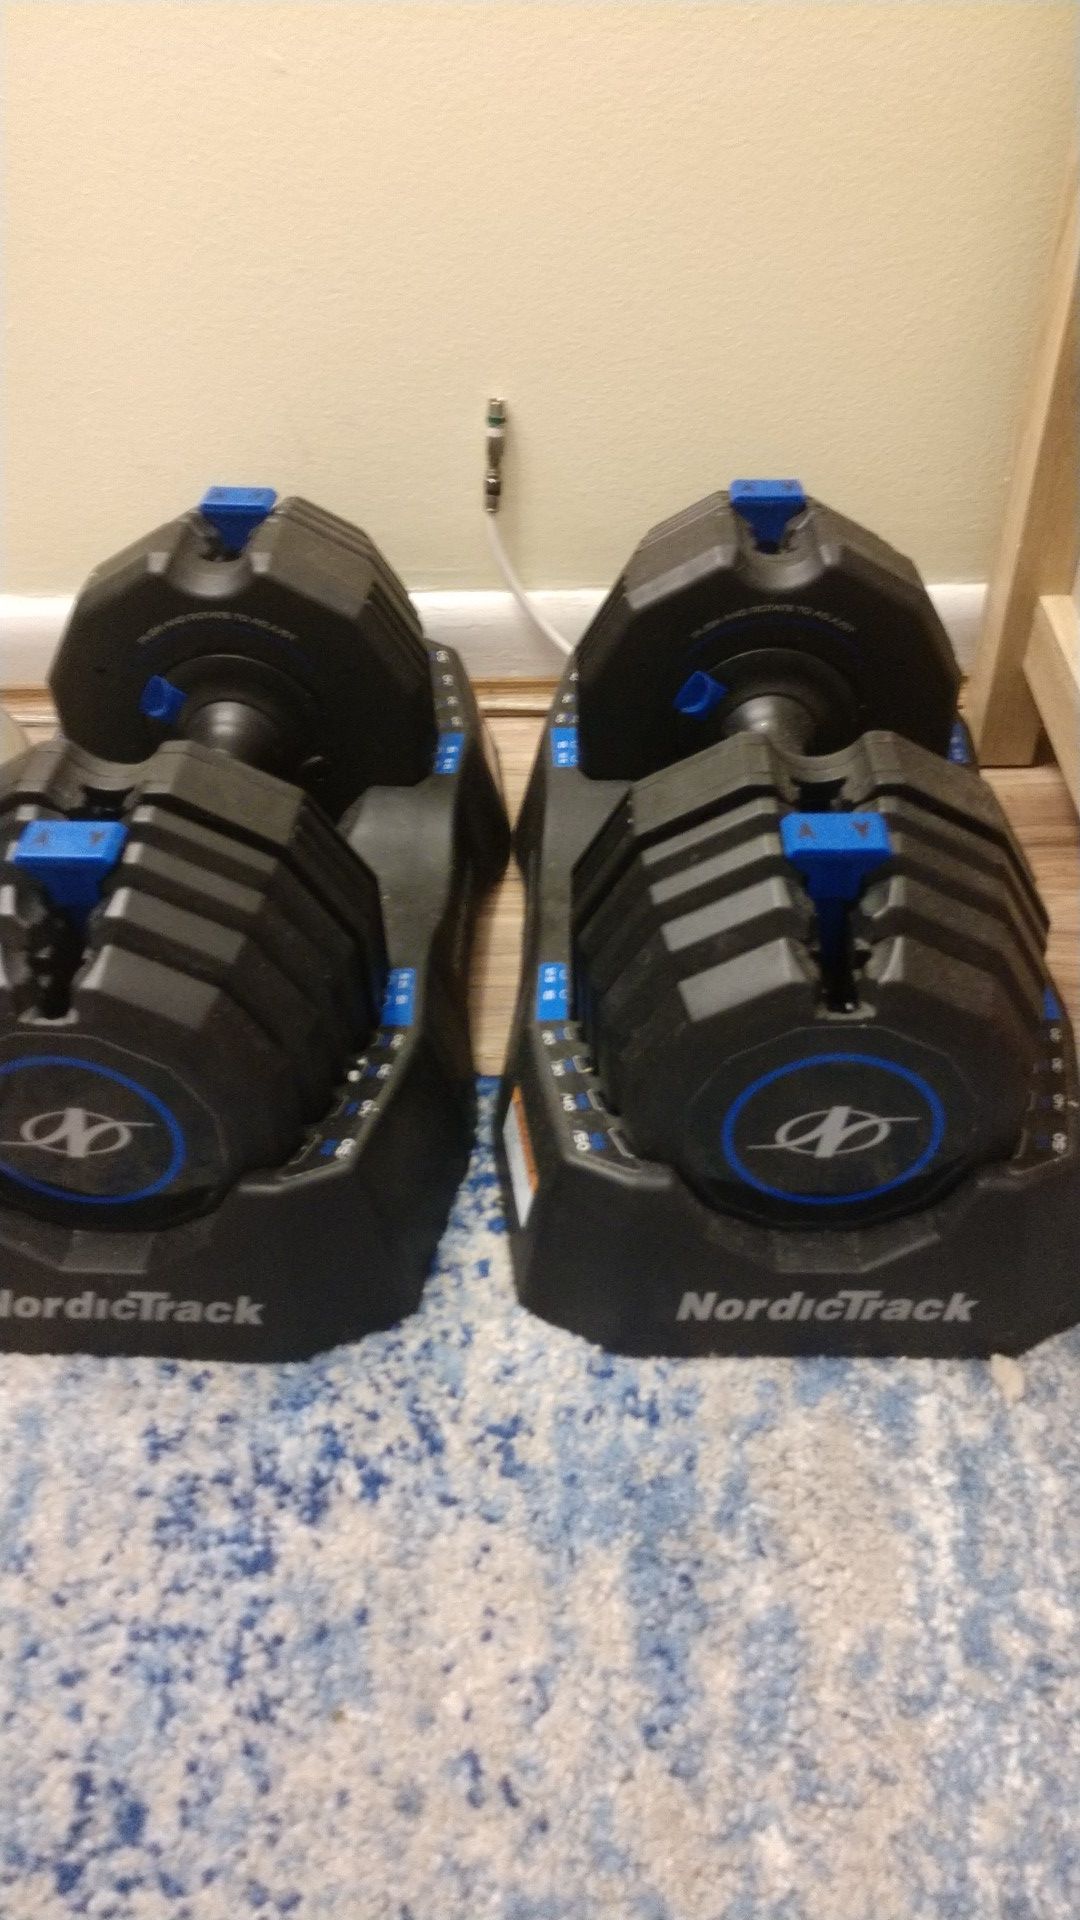 Nordic track weights